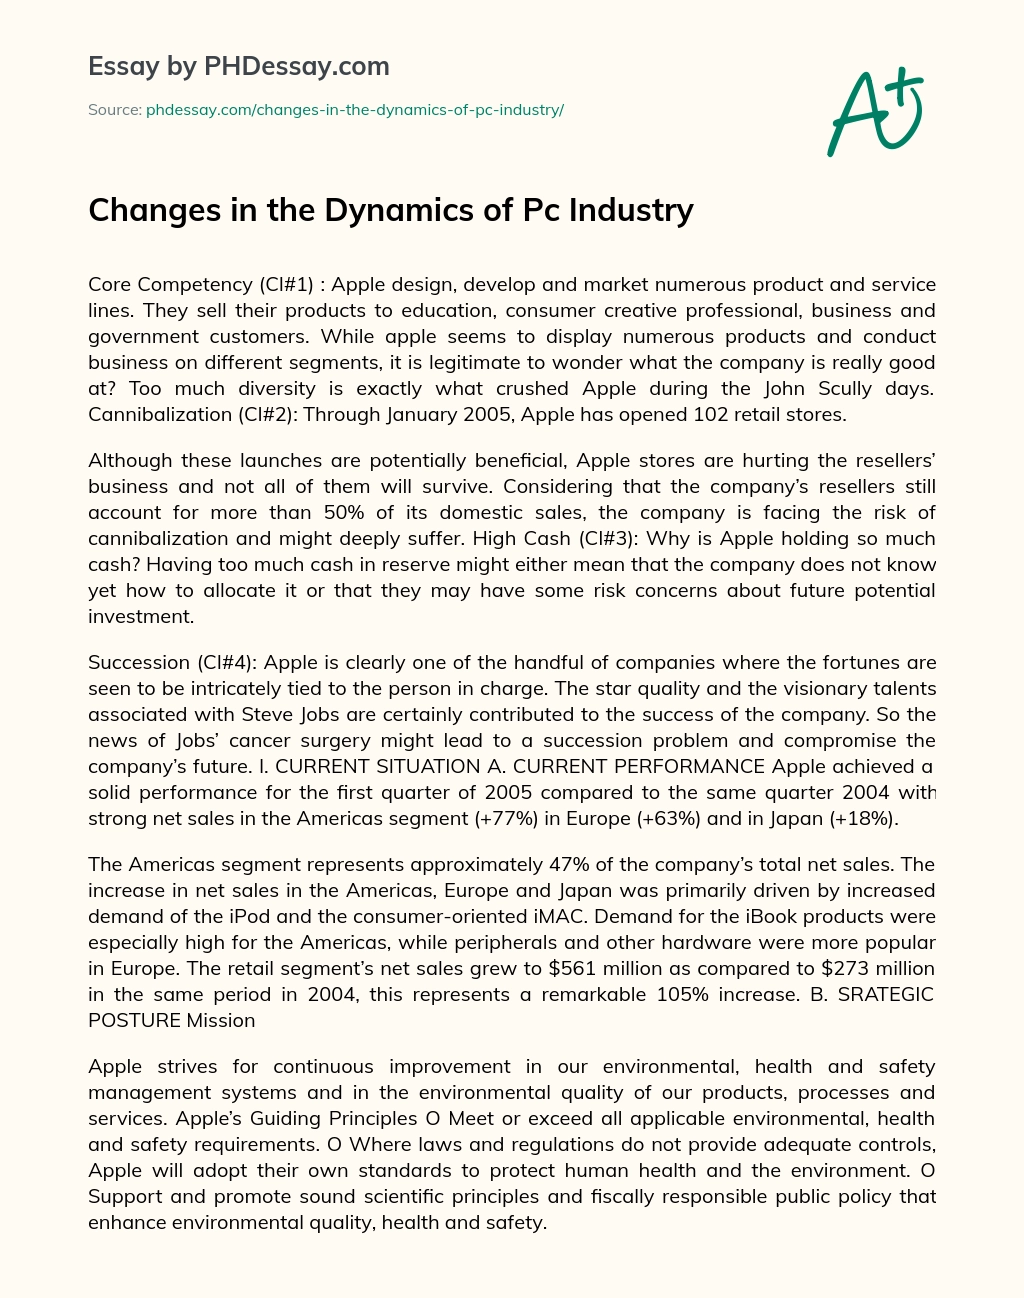 Changes in the dynamics of PC industry essay